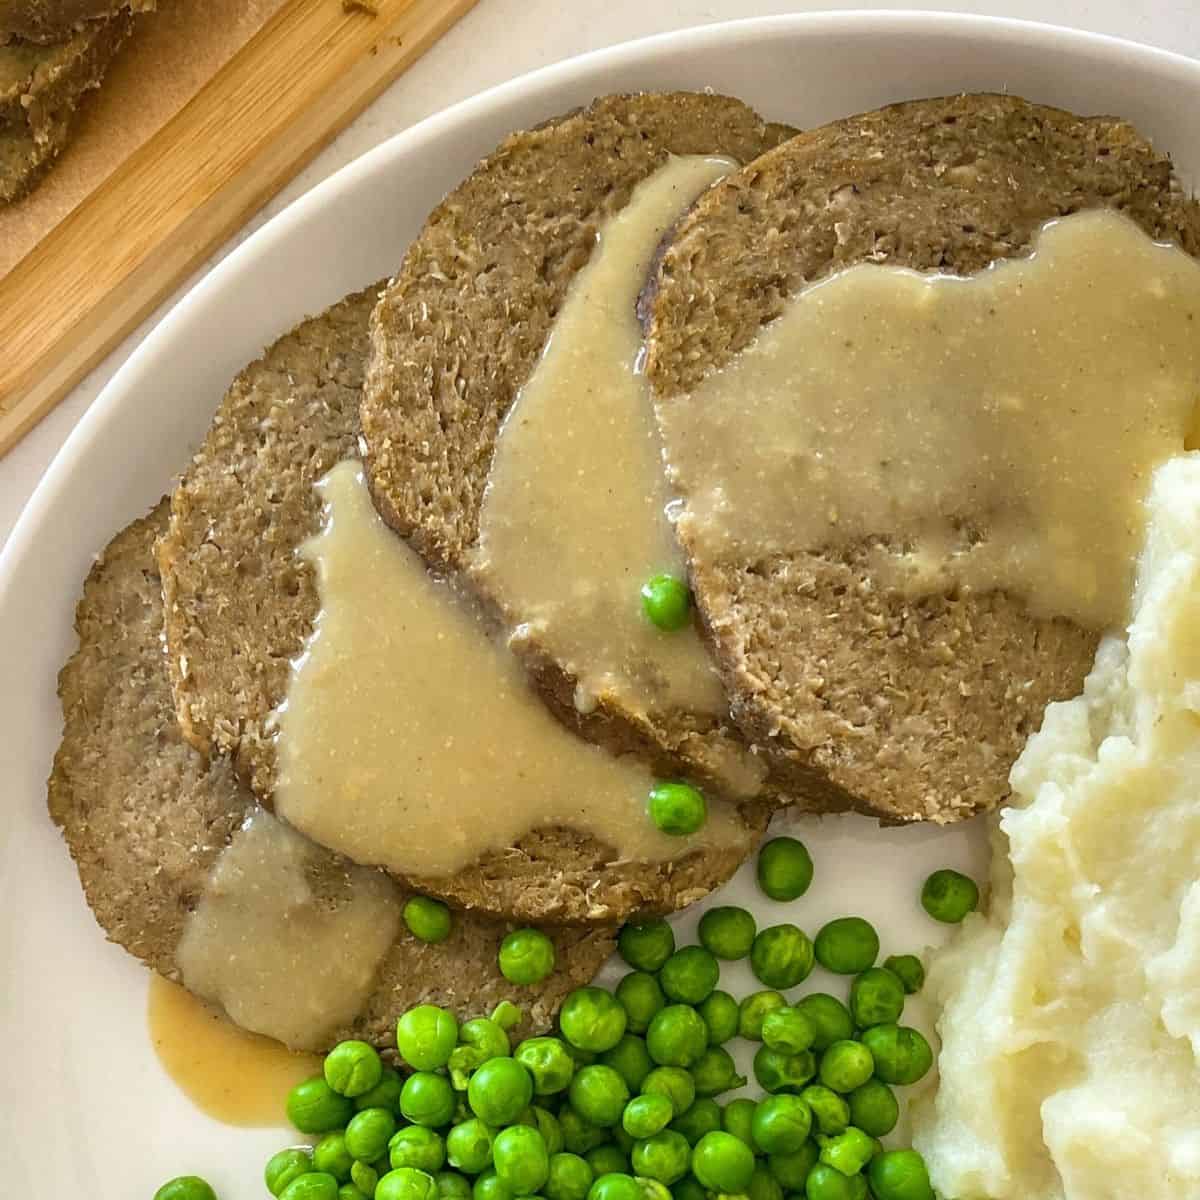 Sliced roast with gravy on top and peas and mashed potatoes beside it.